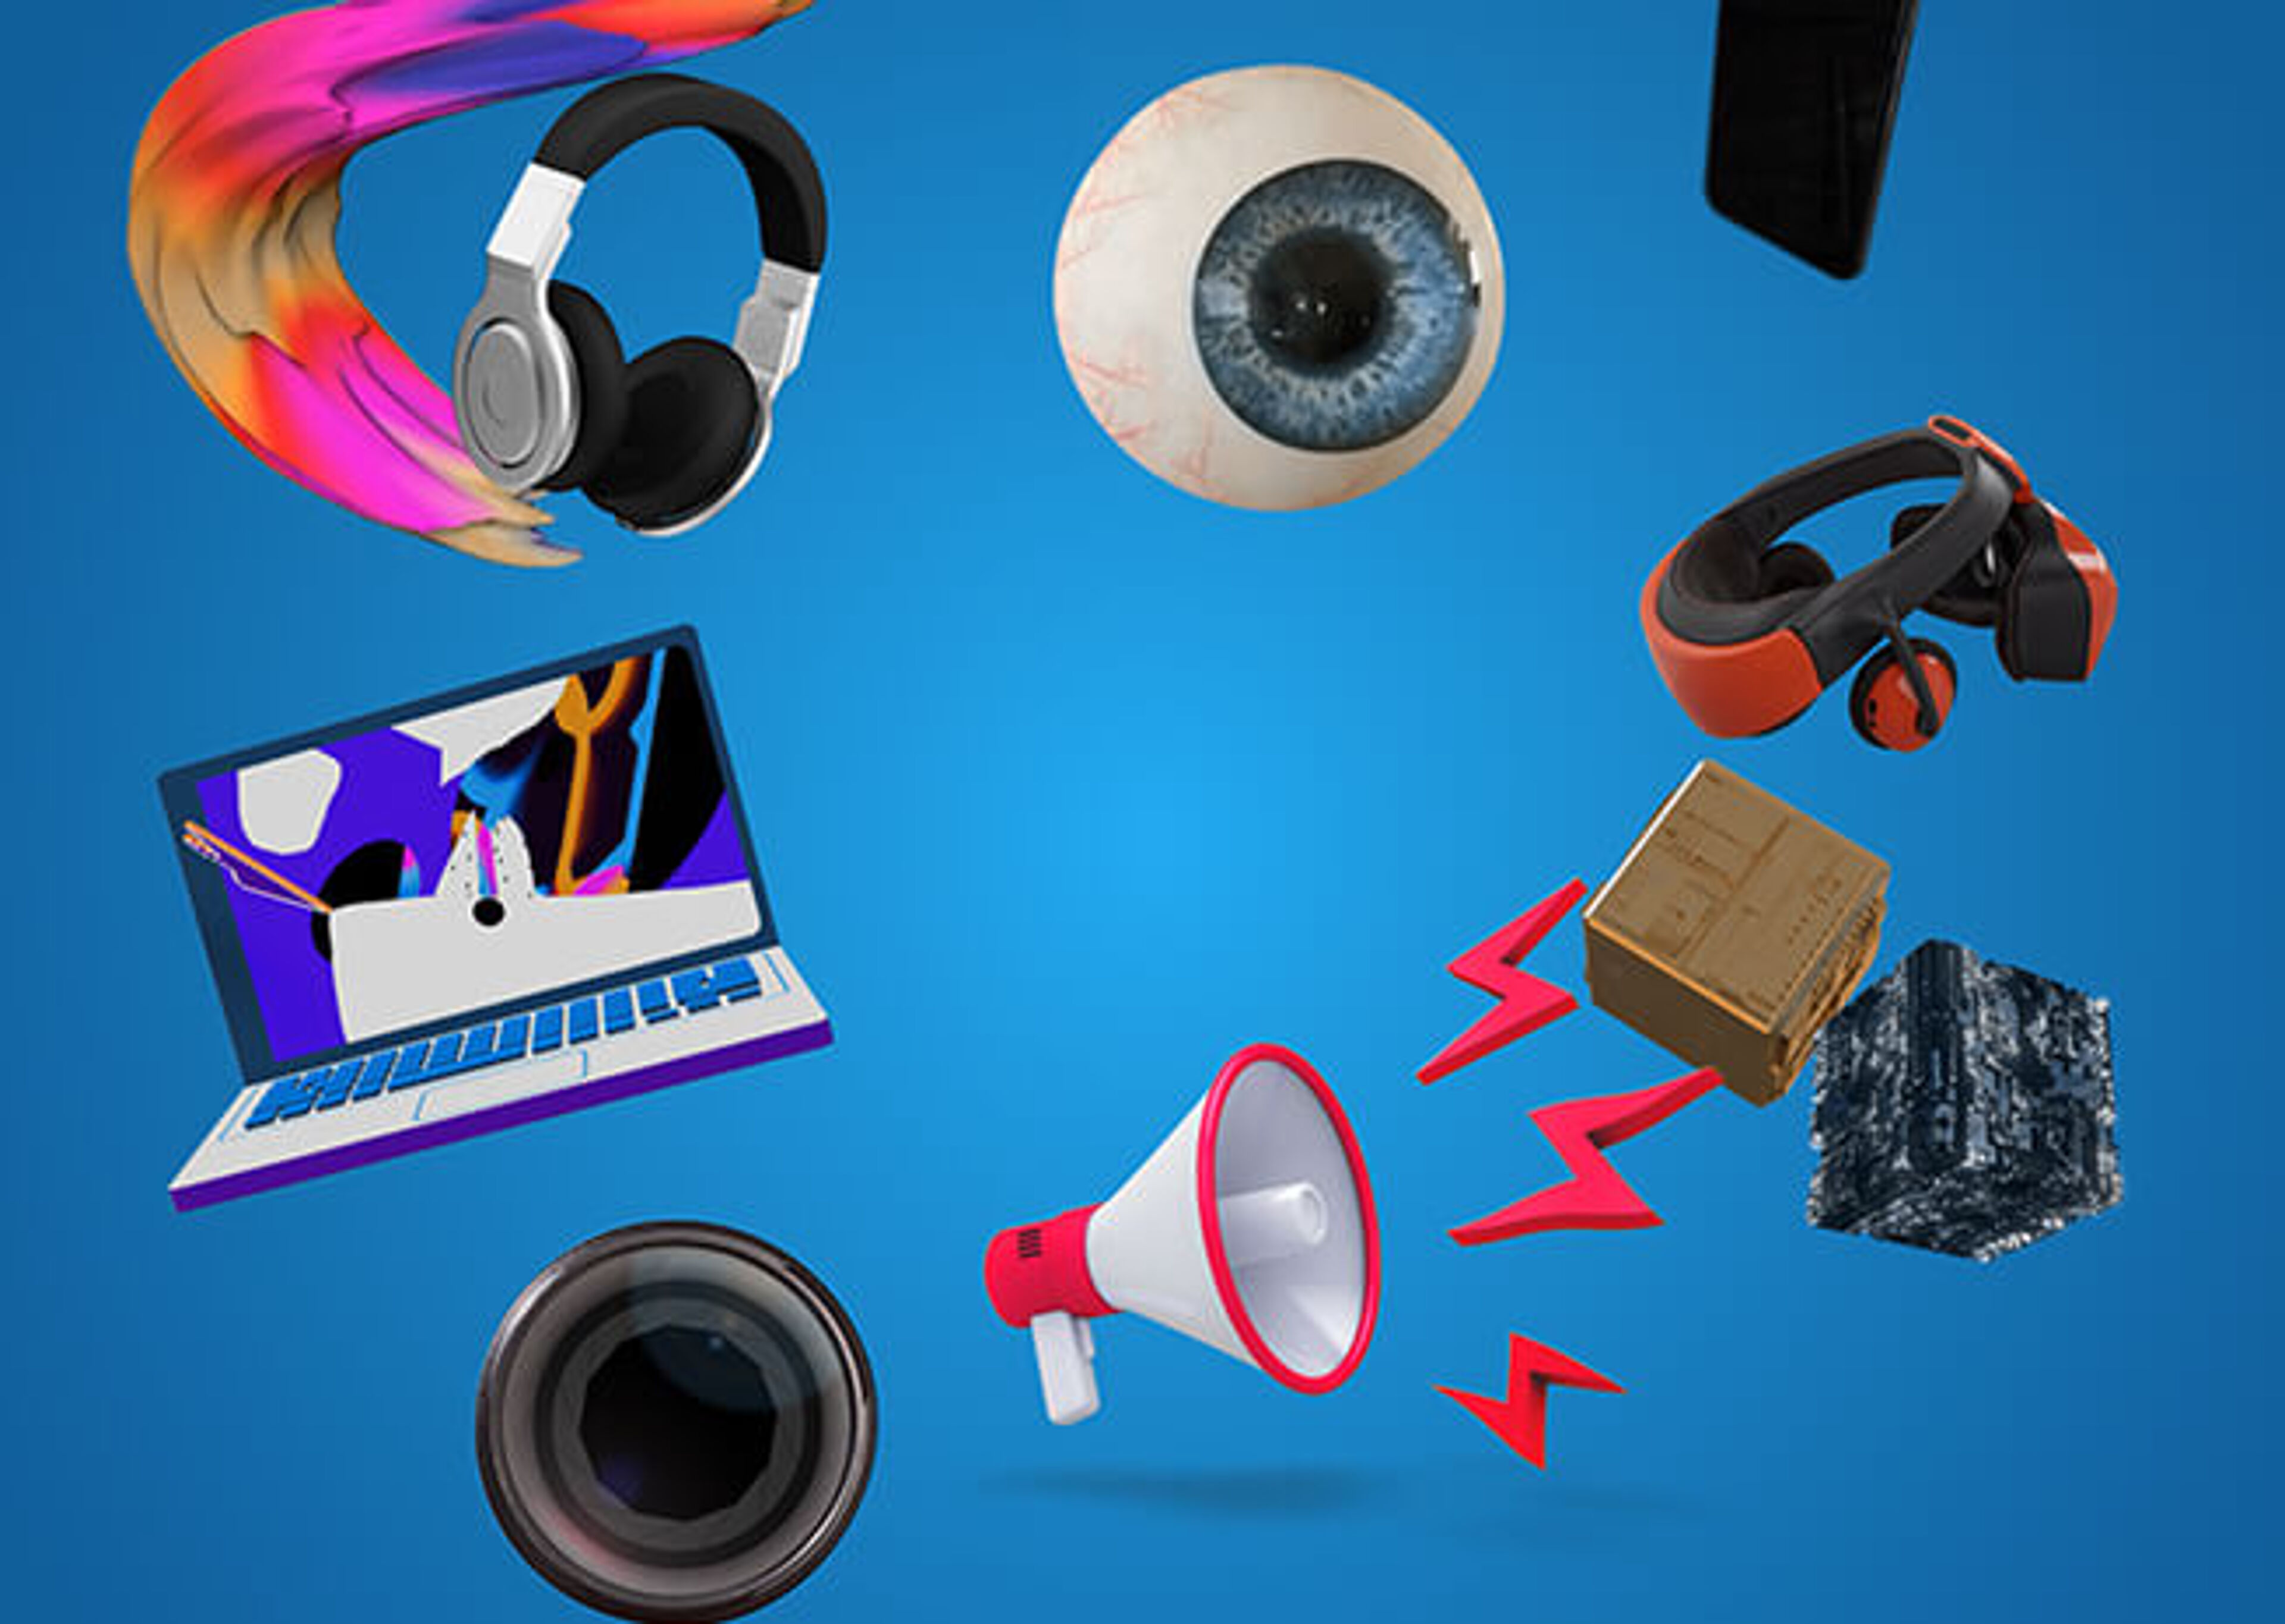 A digital collage of various multimedia objects including headphones, an eyeball, VR headset, laptop, megaphone, camera lens, and a speaker, all against a blue background.